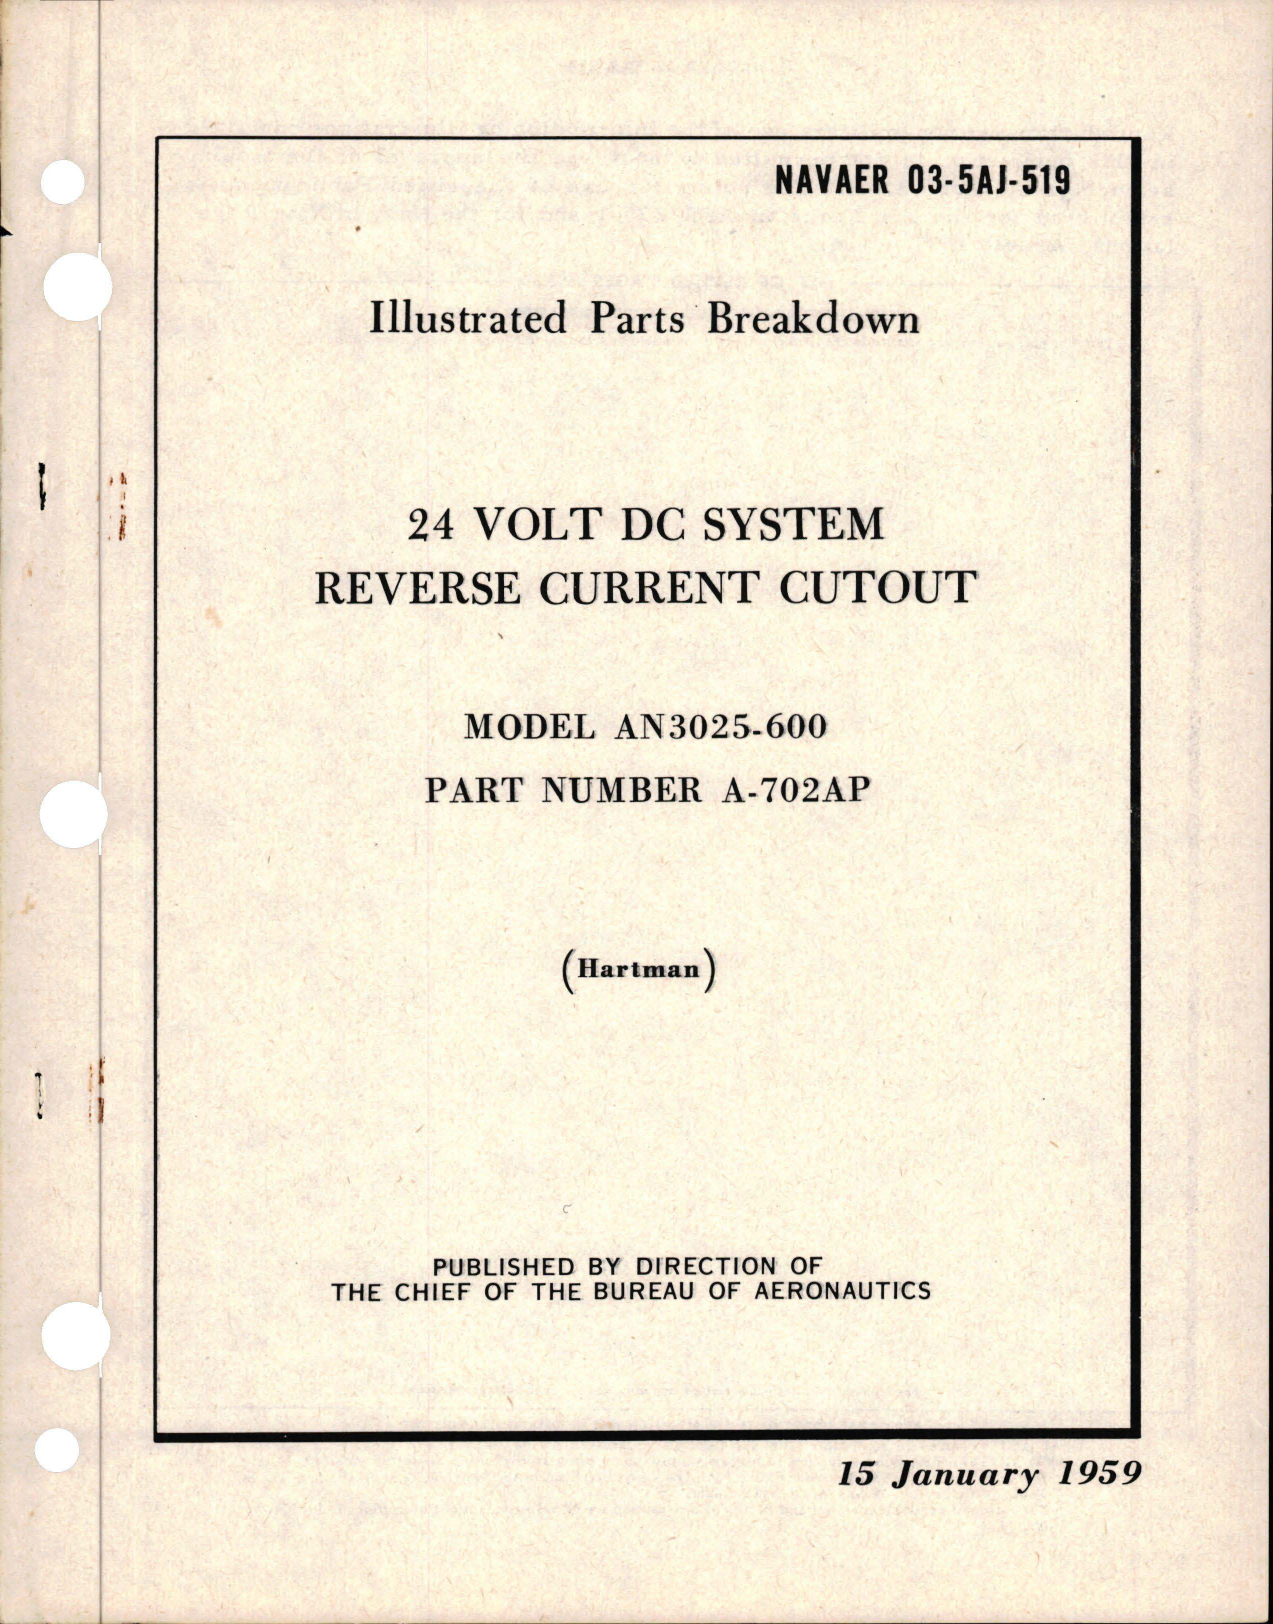 Sample page 1 from AirCorps Library document: Illustrated Parts Breakdown for Reverse Current Cutout - 24 Volt DC System - Model AN3025-600 - Part A-702AP